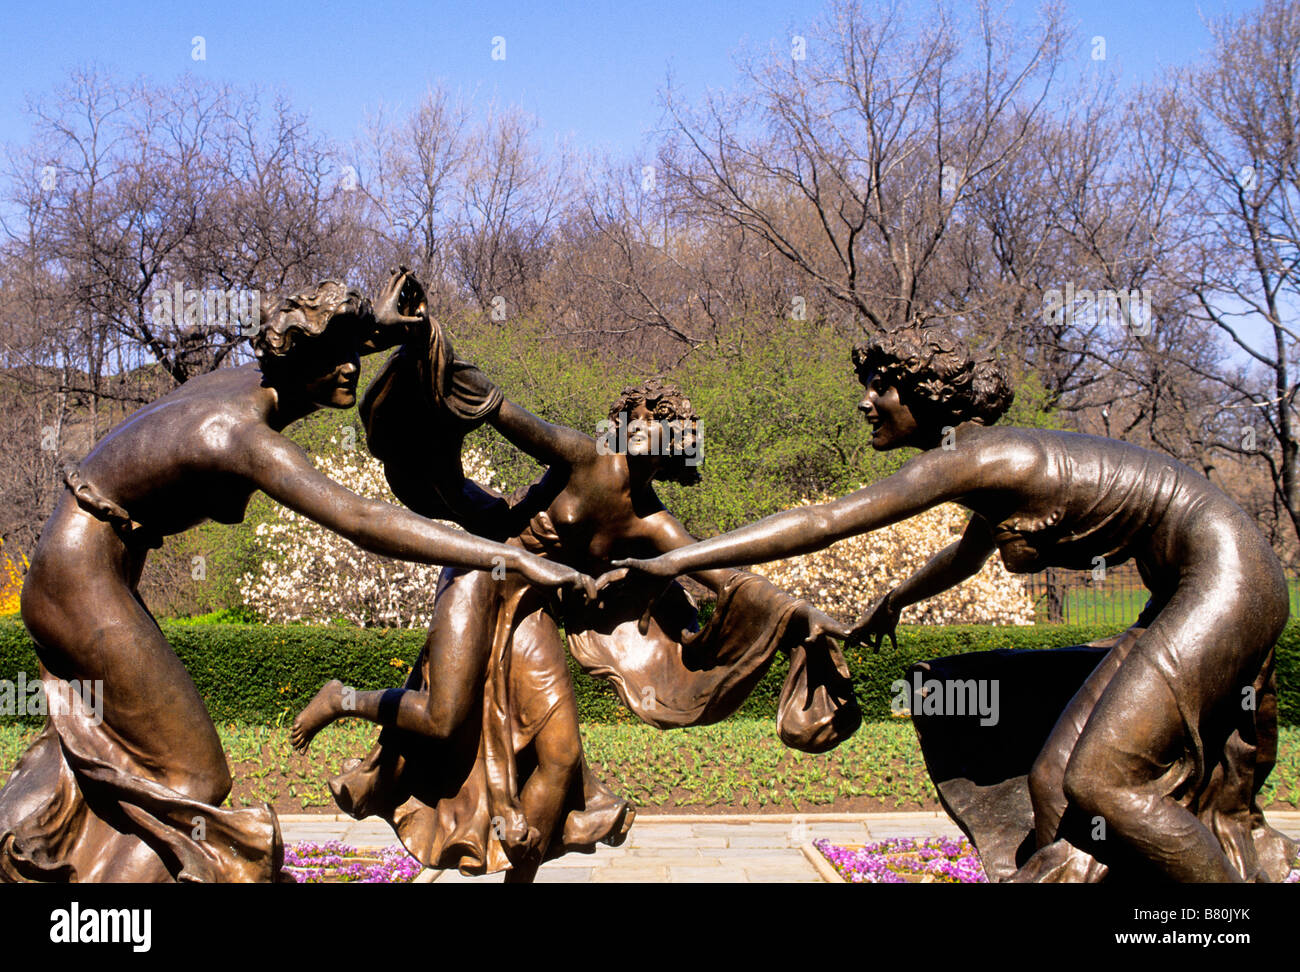 New York City Central Park Conservatory Garden The Louis Untermeyer Fountain Statue of The Three Graces. Central Park Conservancy. USA Stock Photo